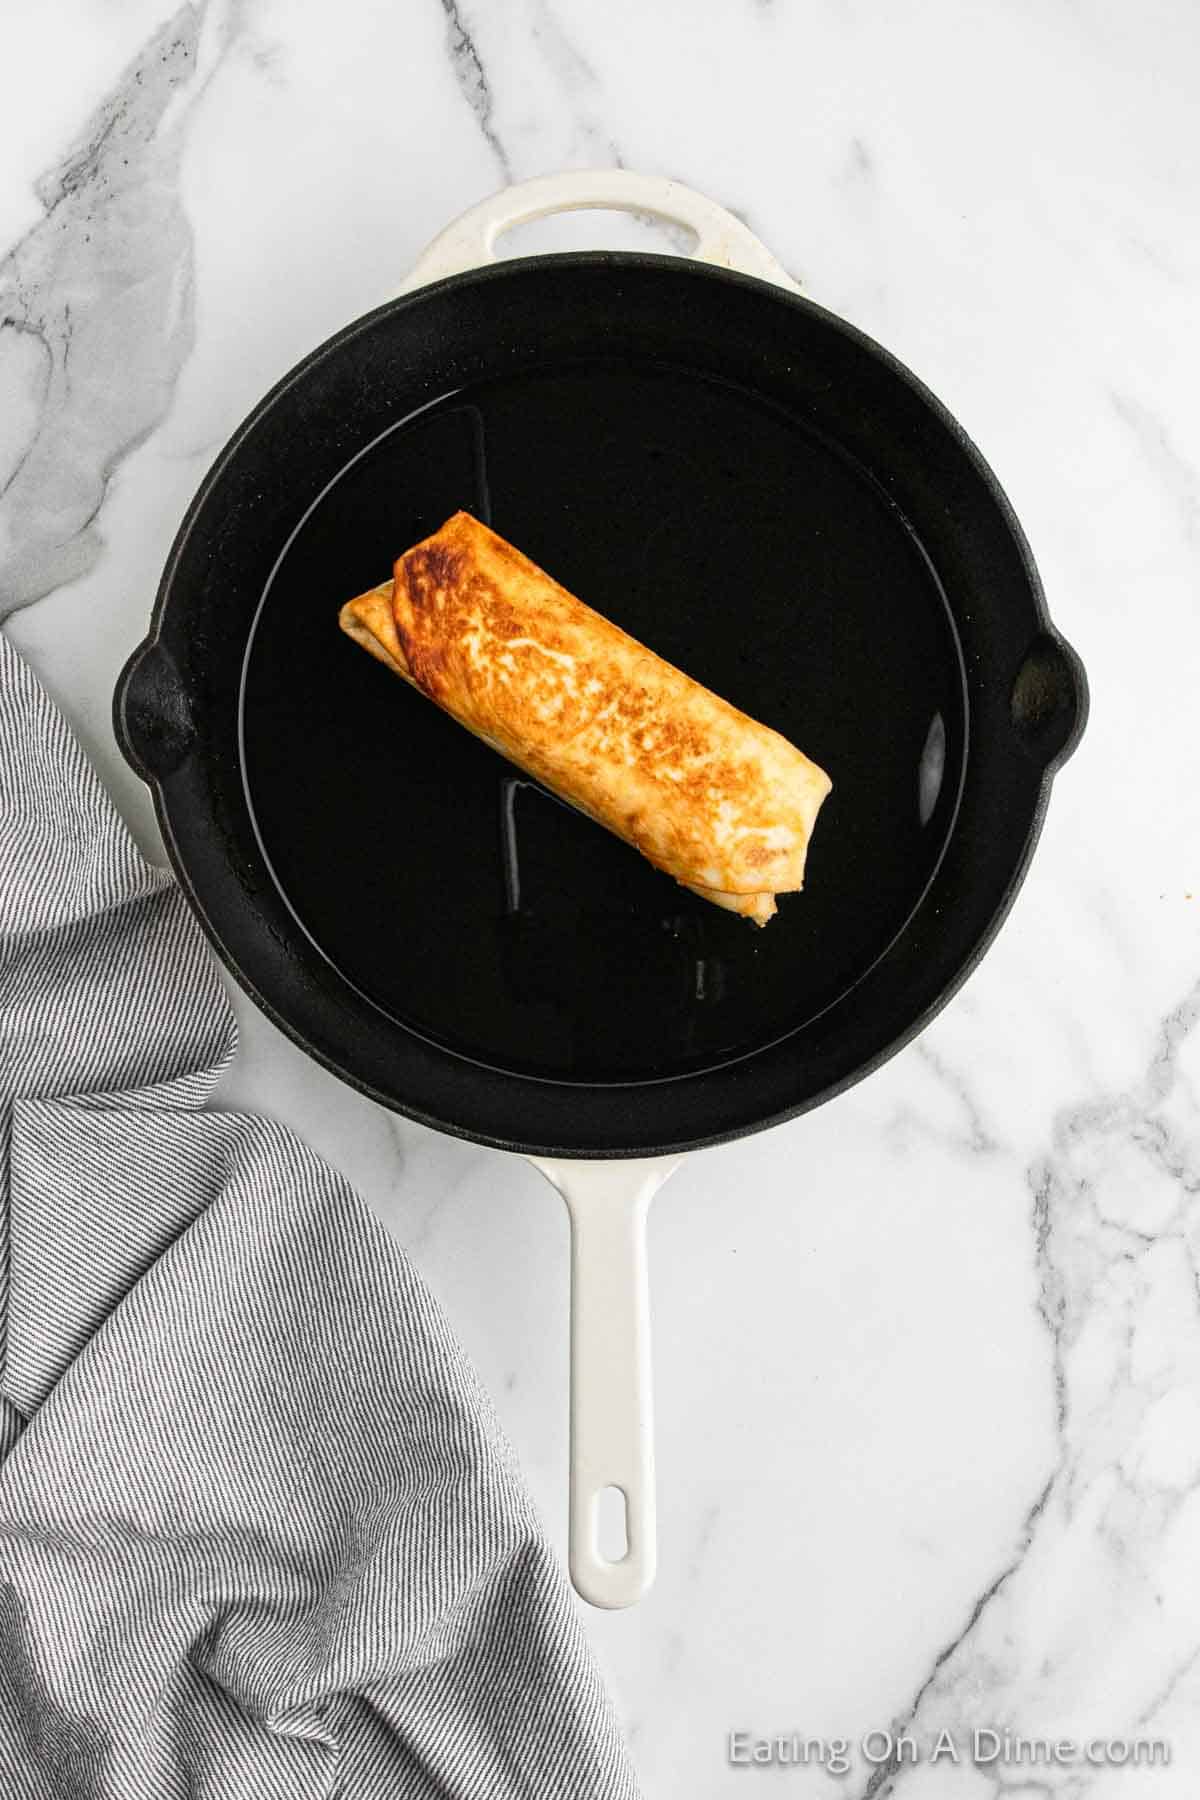 A single beef chimichanga is being cooked in a black cast iron skillet. The skillet is placed on a white marble countertop with a grey and white striped kitchen towel beside it. The chimichanga is partially browned, showcasing its crisp texture.